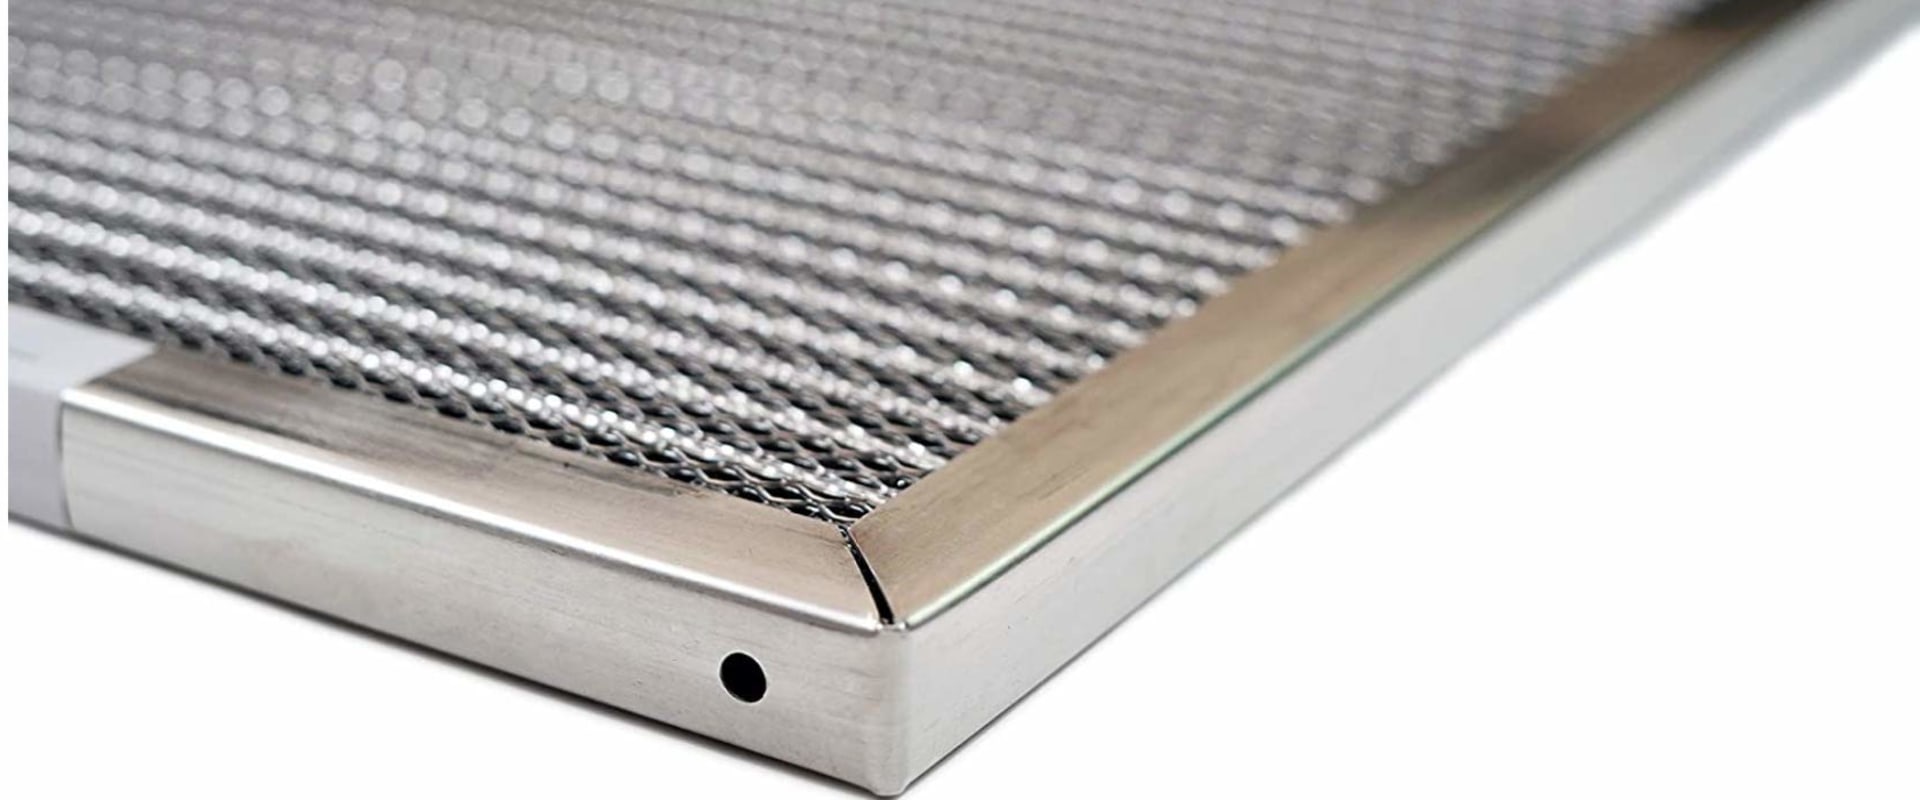 Everything You Need to Know About Electrostatic and Activated Carbon 20x25x1 Air Filters